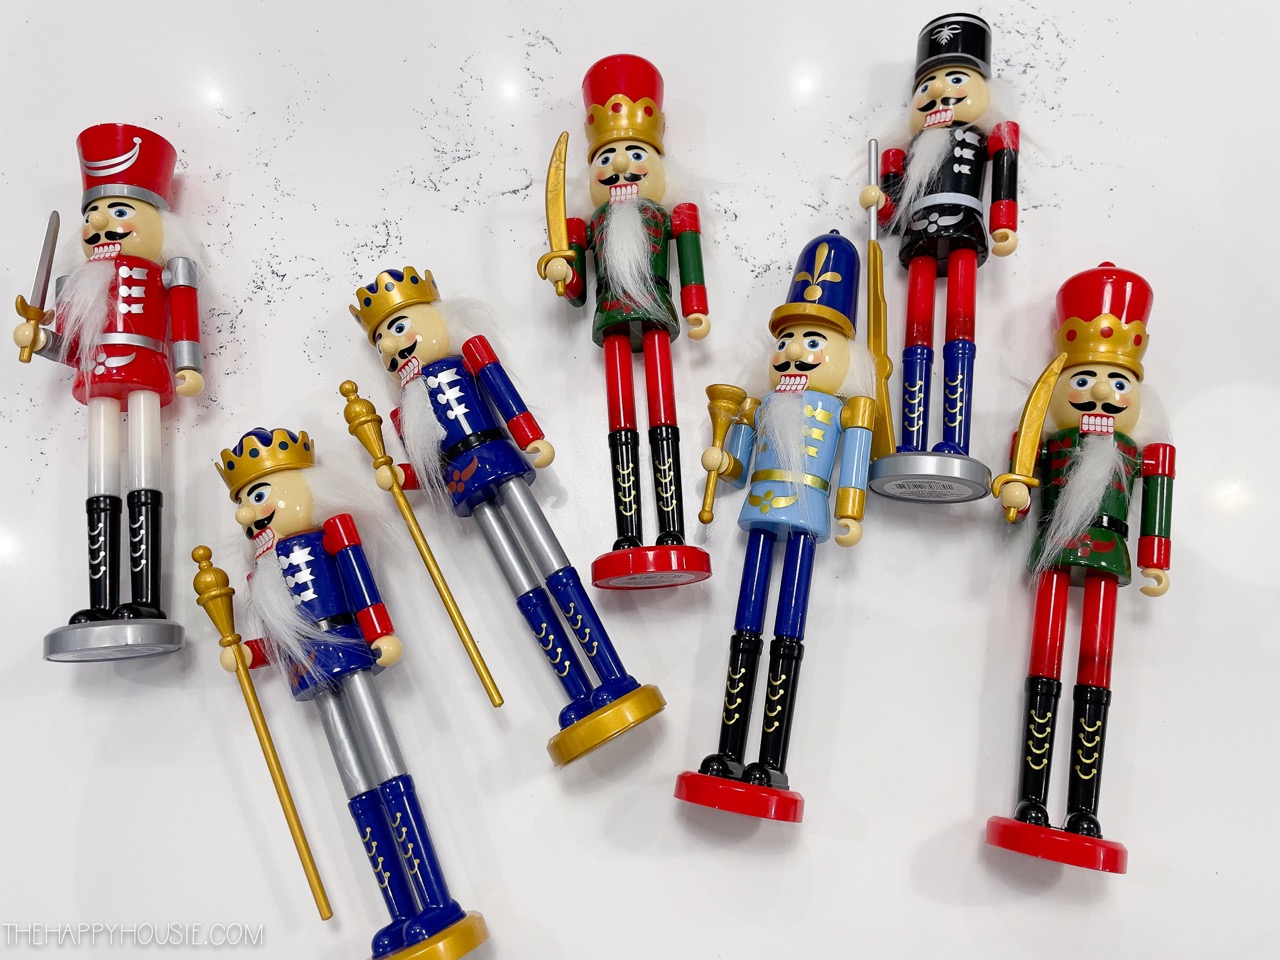 How To Store Nutcrackers